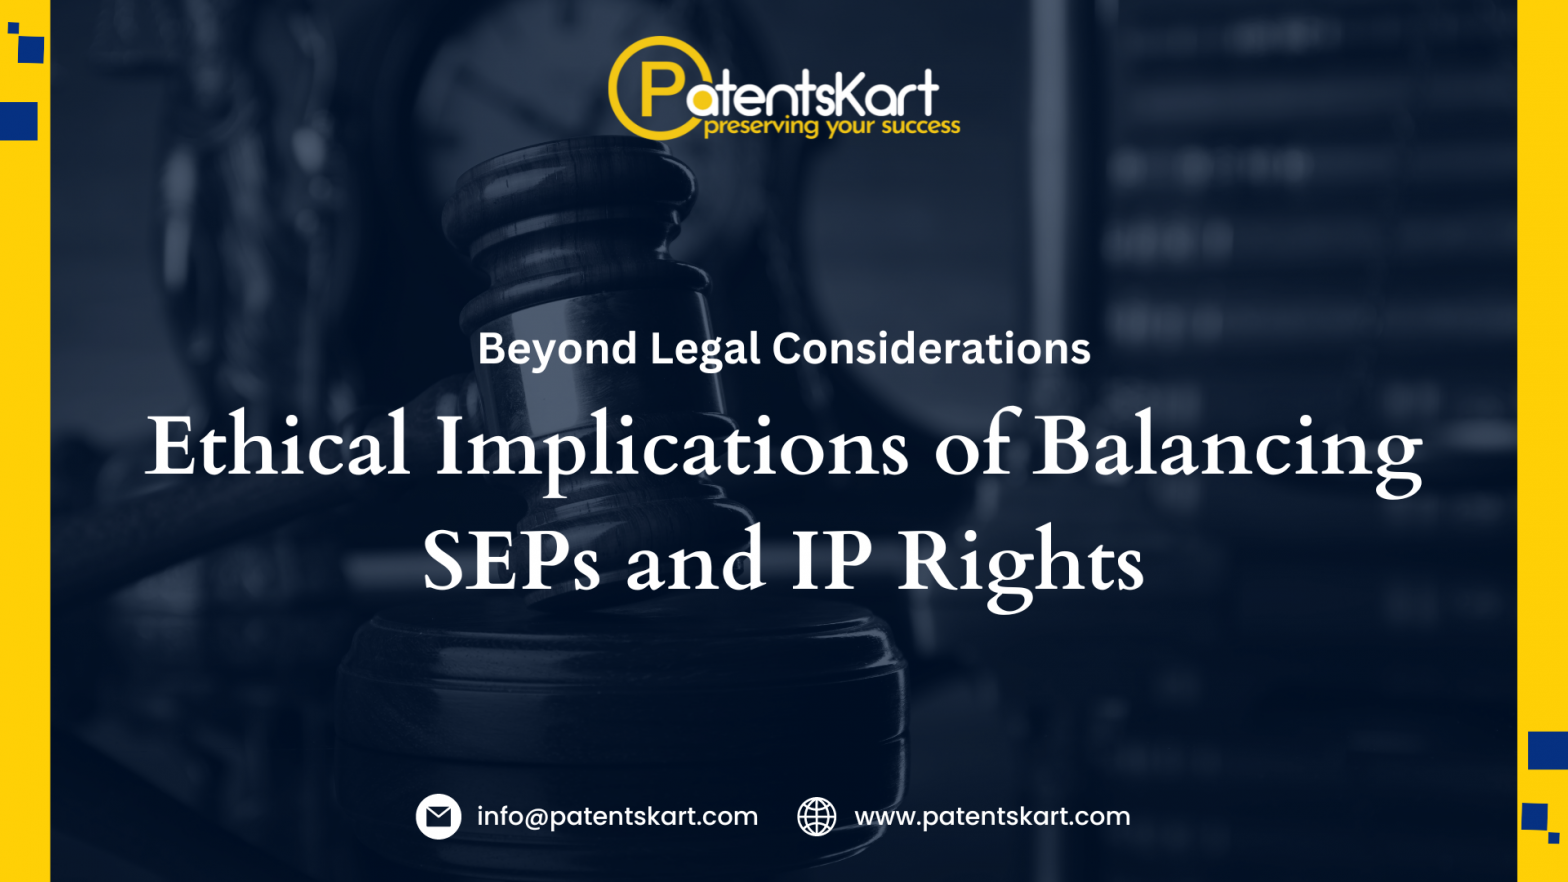 SEP, IP Rights, intellectual property, Standard-Essential Patents